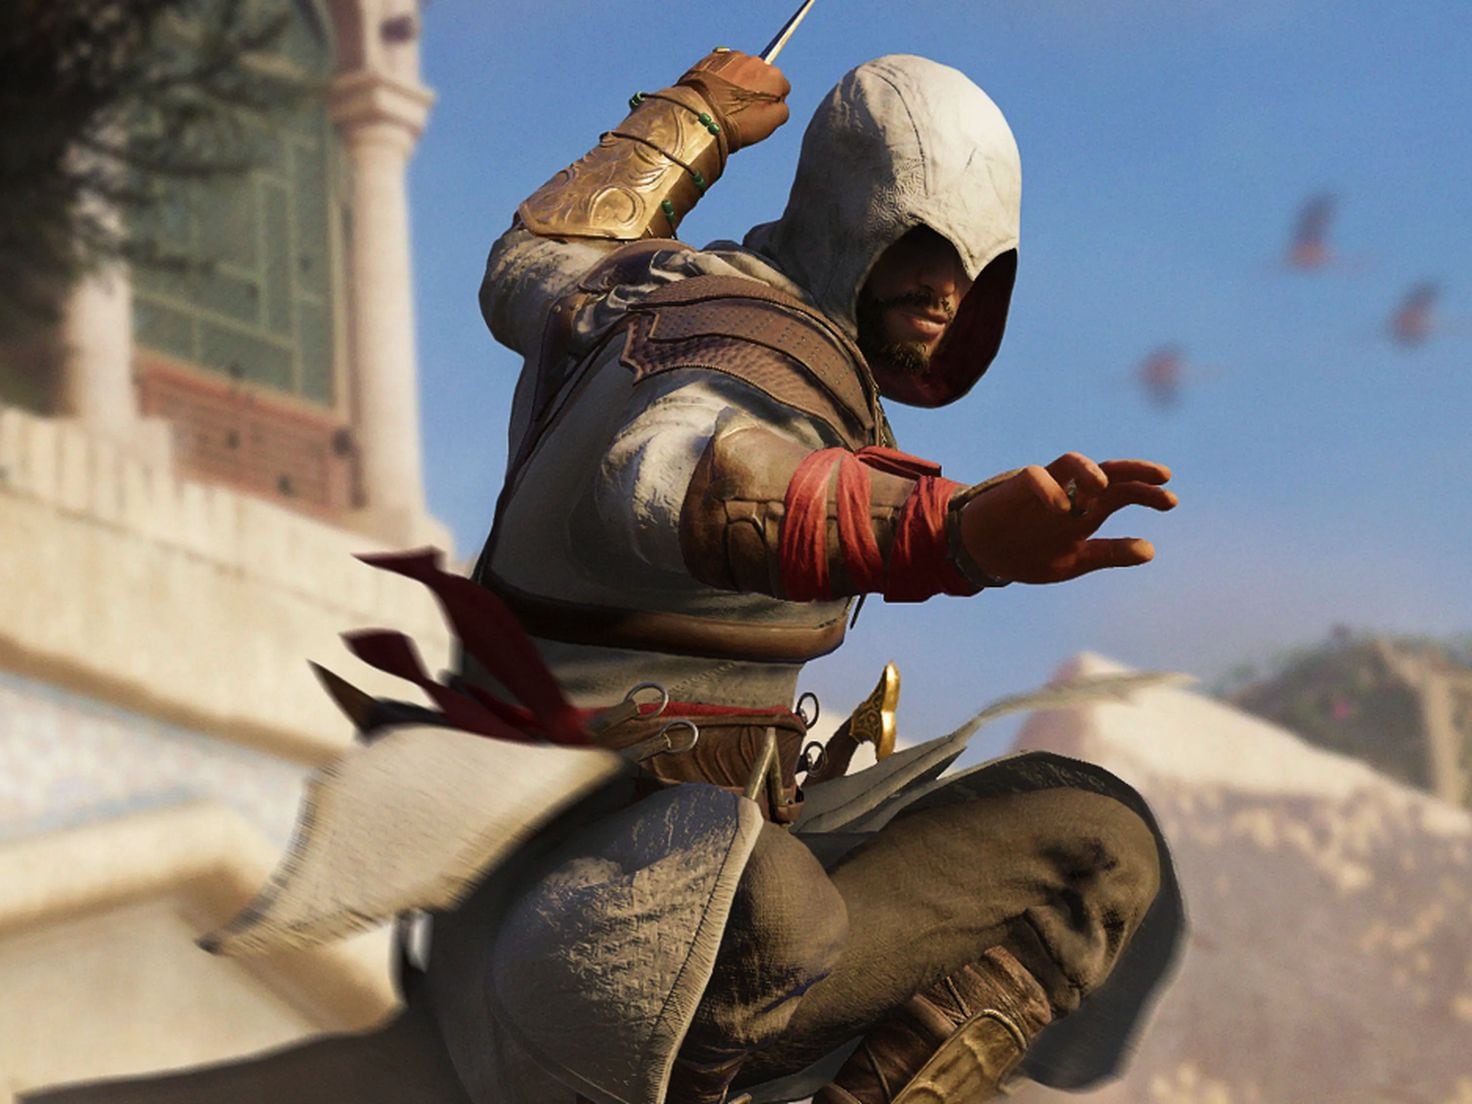 Assassin's Creed Mirage preview: Finally, a return to stealth roots